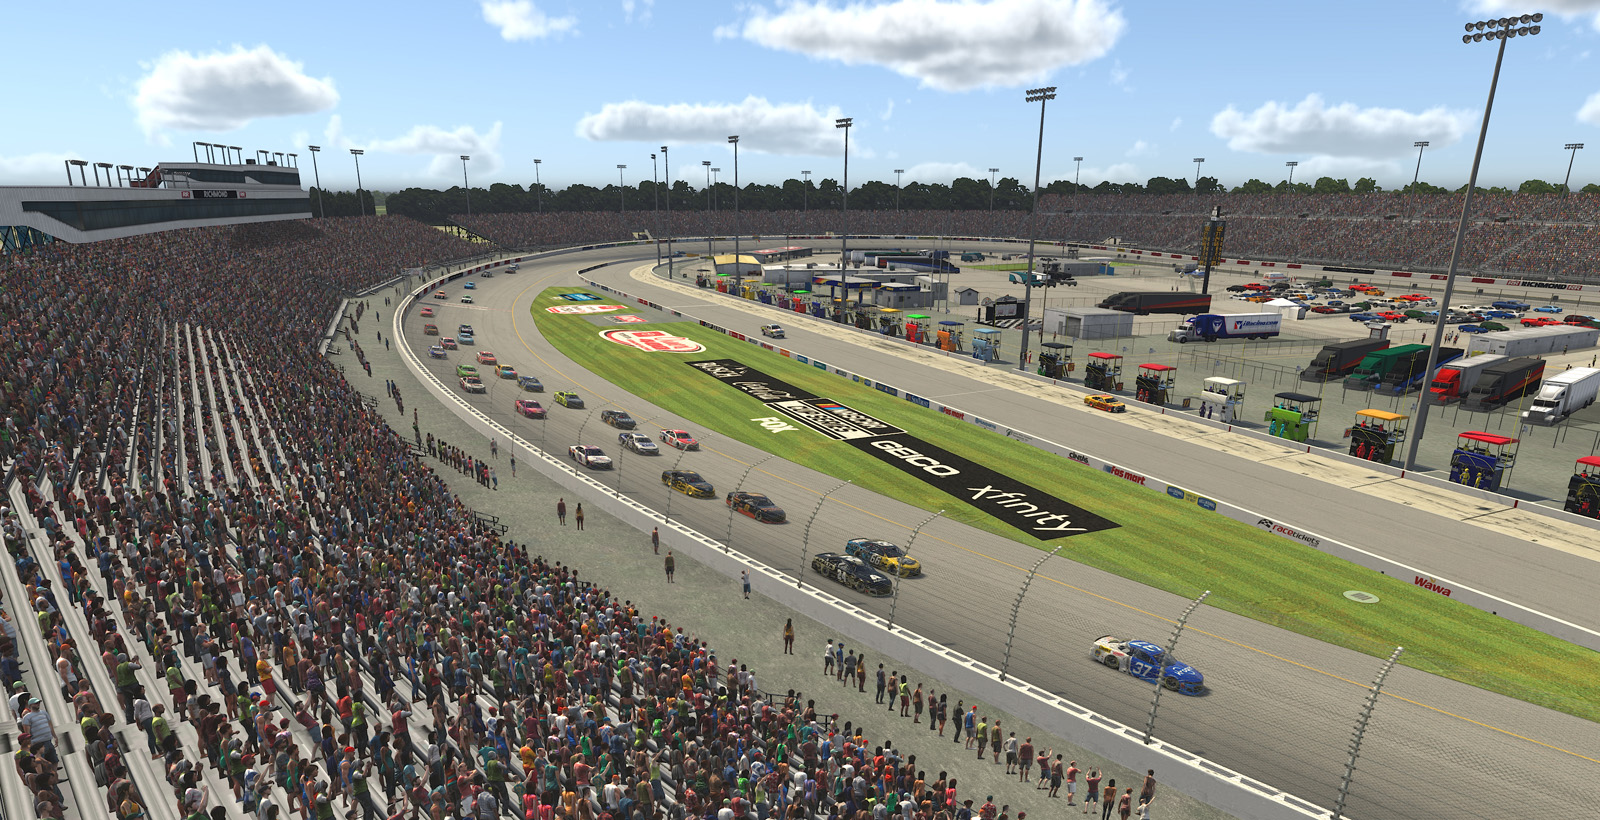 eNASCAR iRacing Pro Invitational Series – Toyota Owners 150